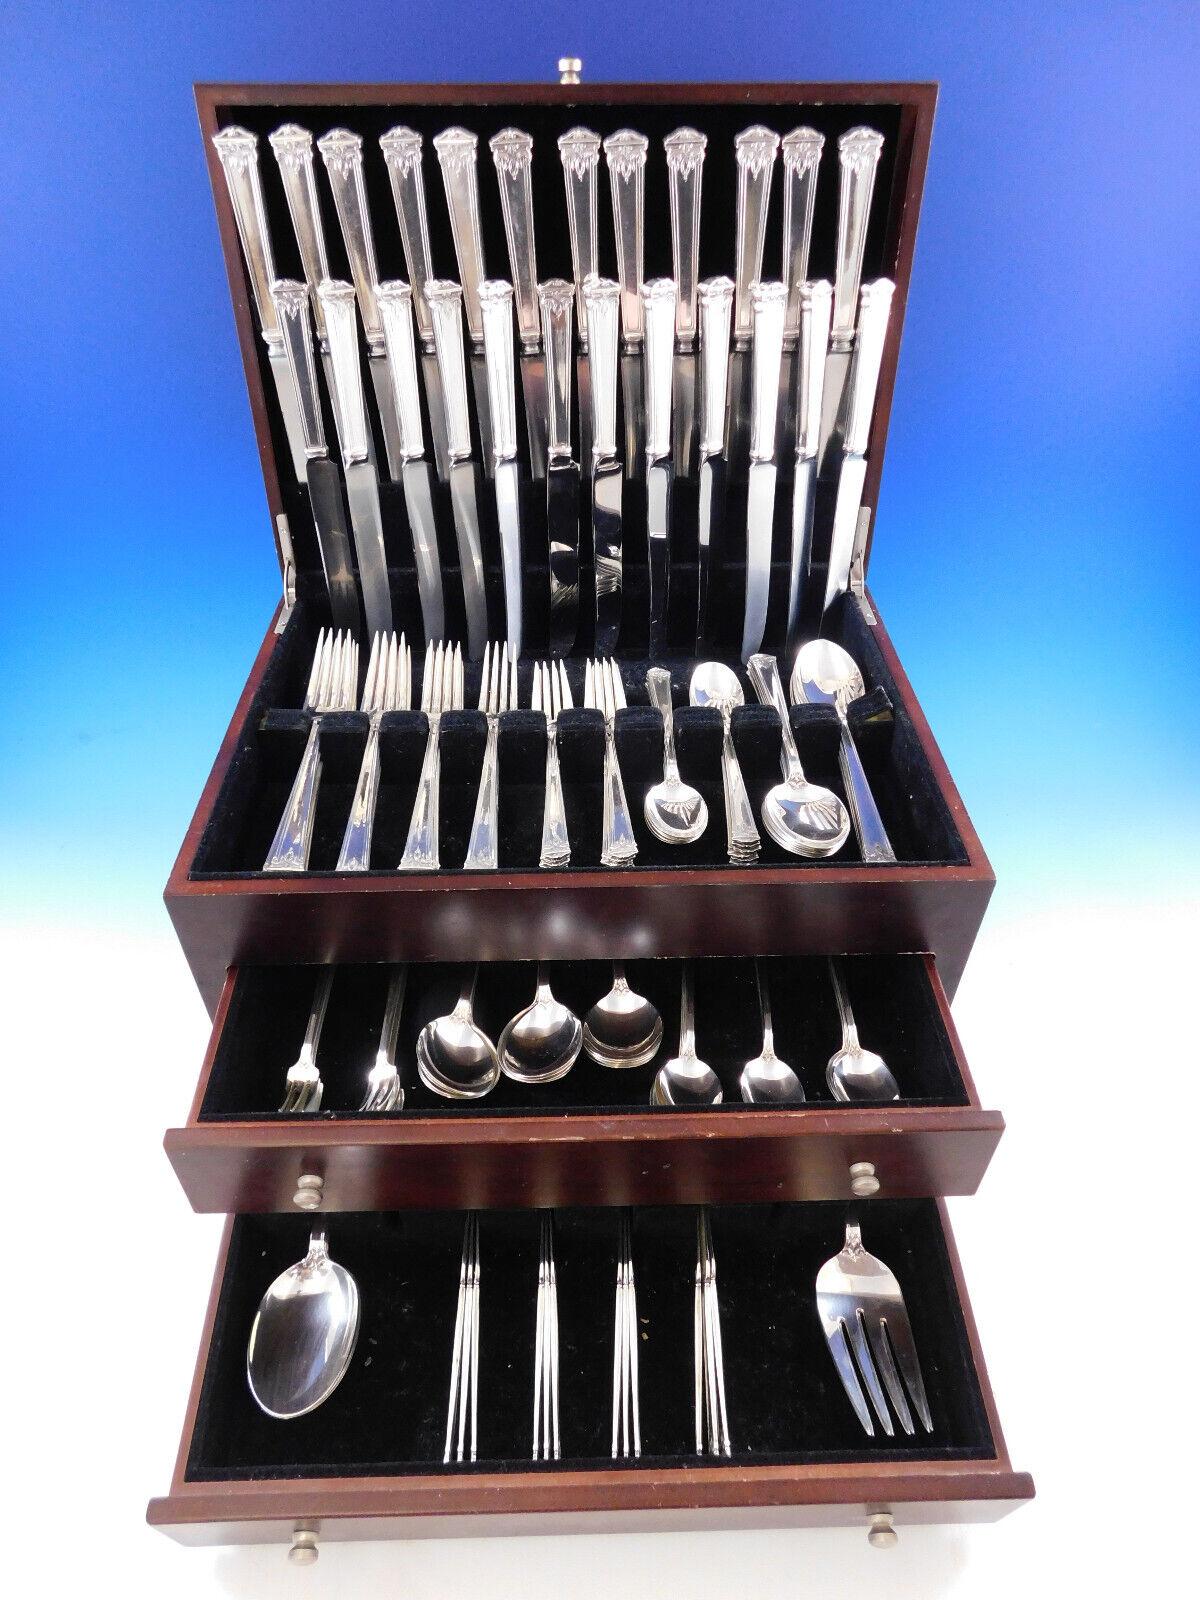 Superb monumental Dinner & Luncheon Size Trianon by International sterling silver Flatware set, 138 pieces. This set includes:

12 Dinner Size Knives, Blunt, 9 7/8